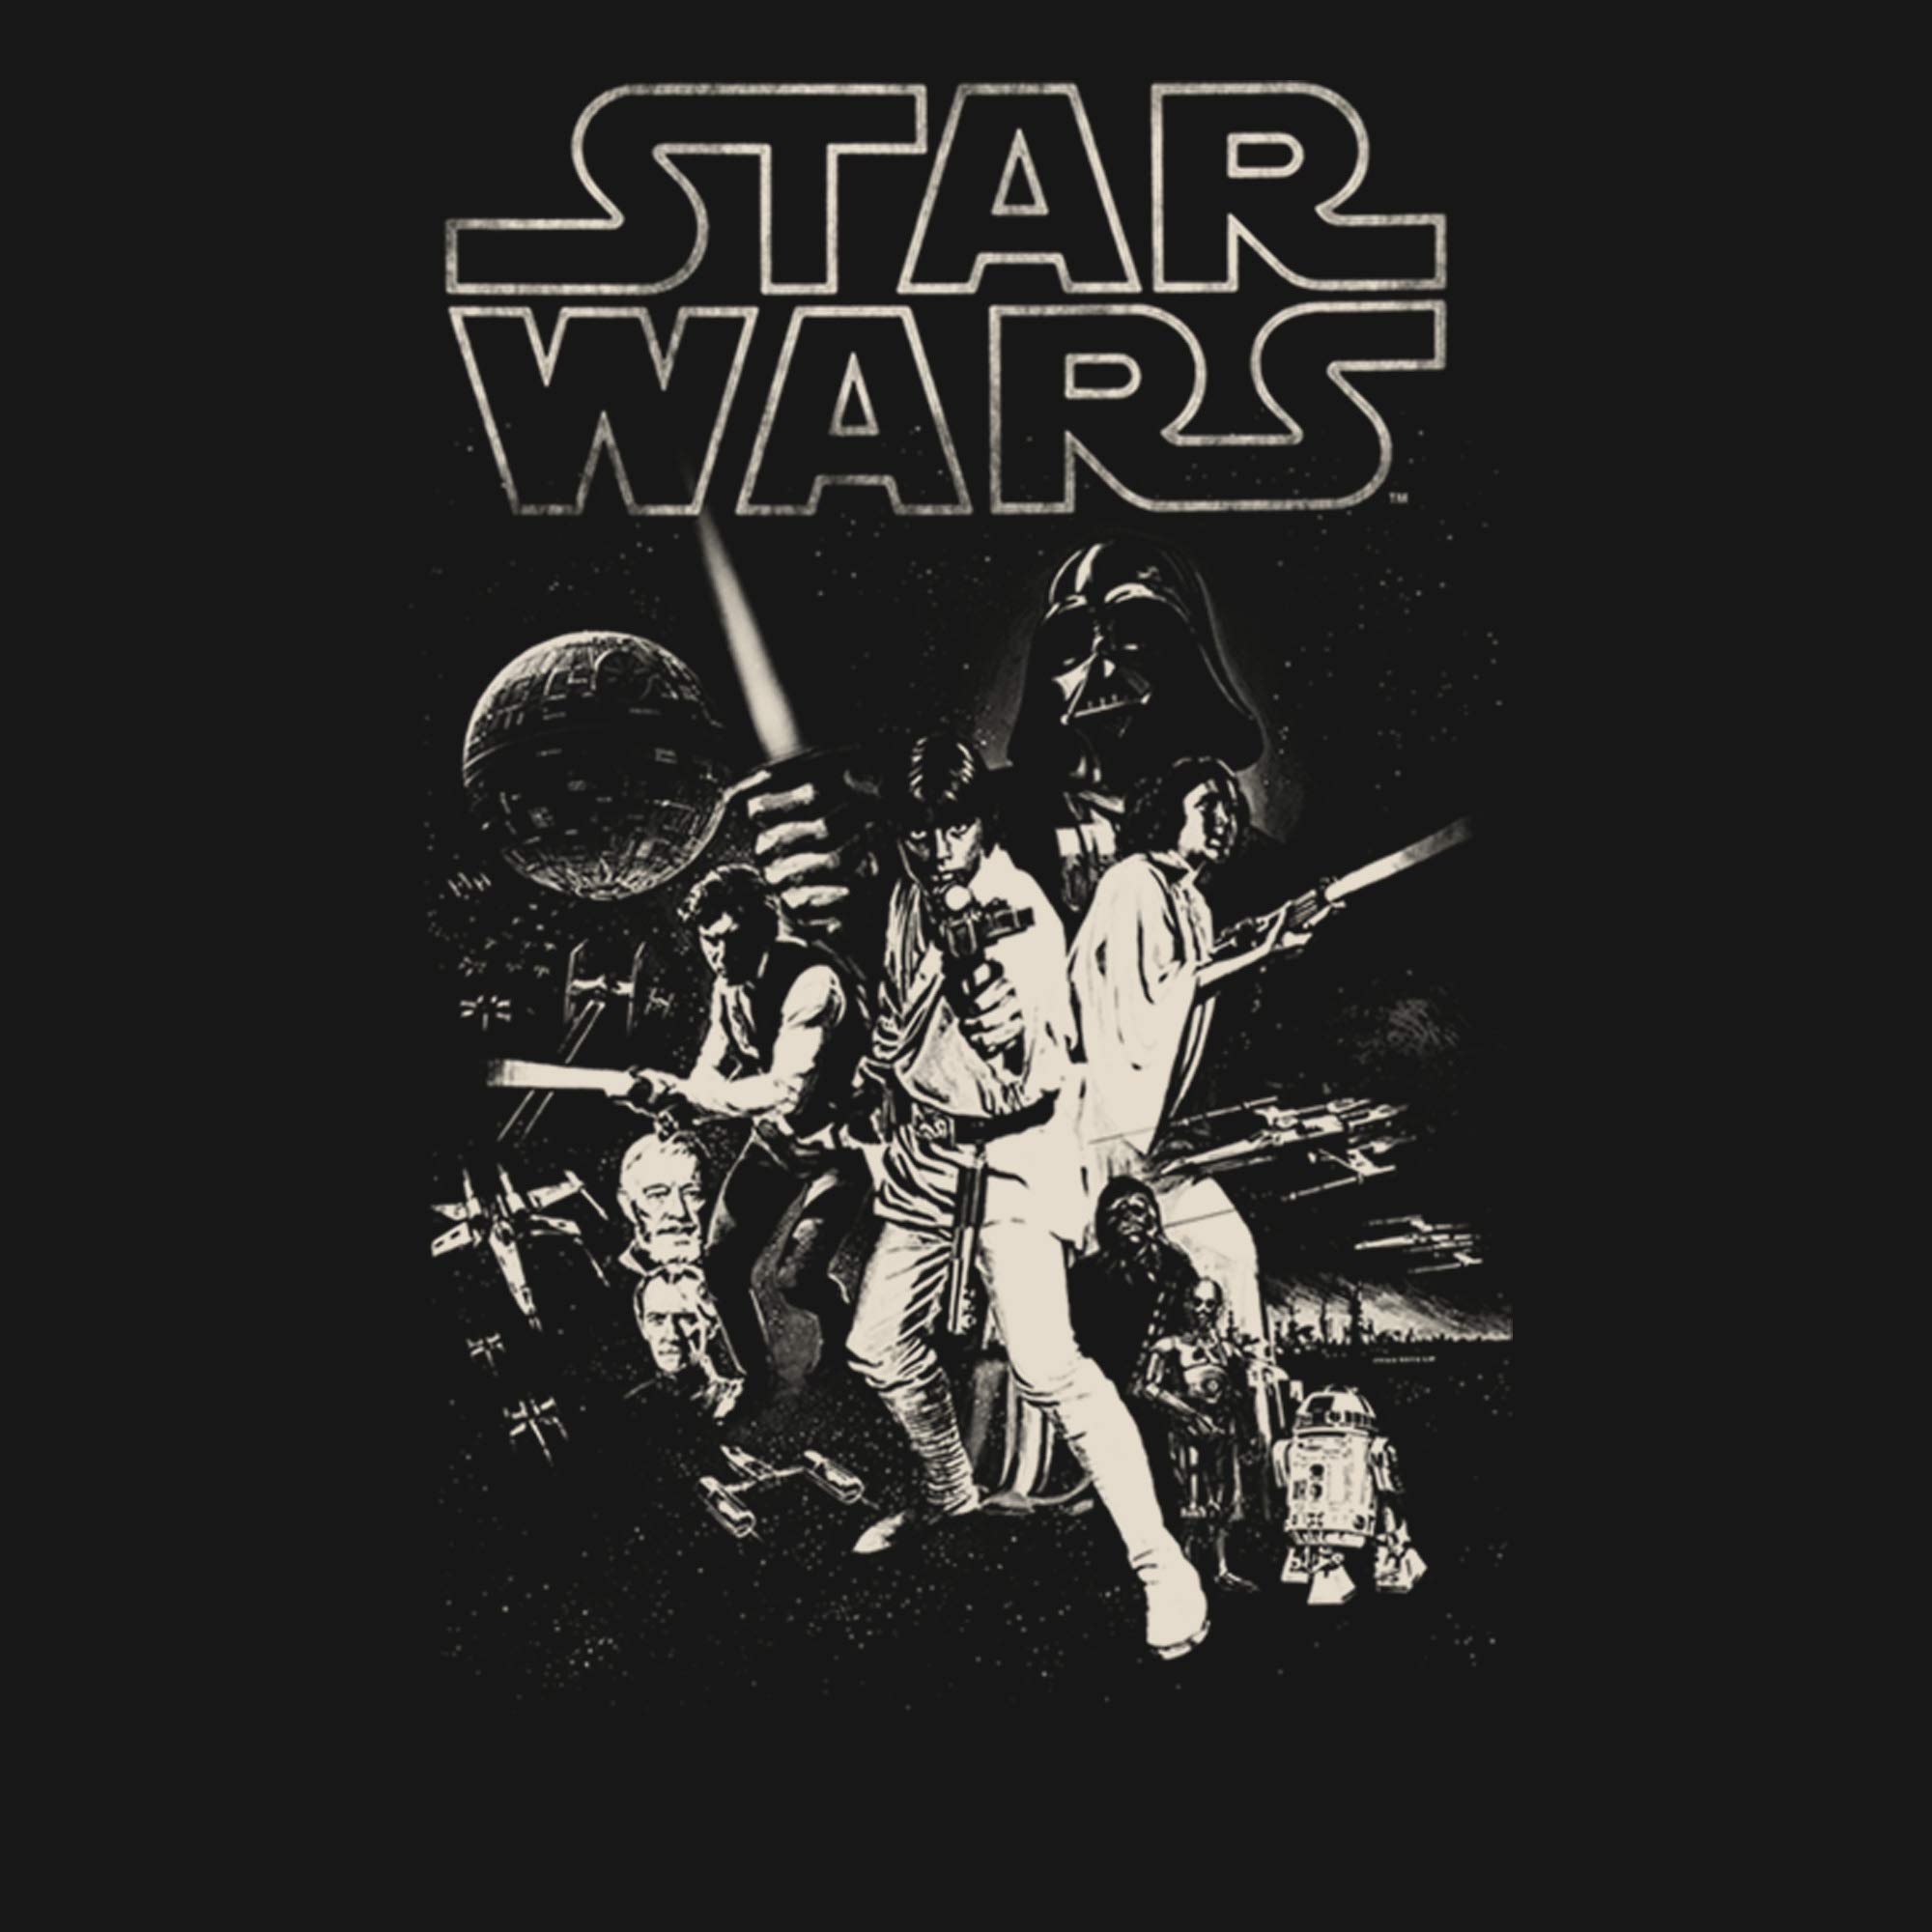 Star Wars Men's Official 'Poster' Premium Performance Graphic Tee